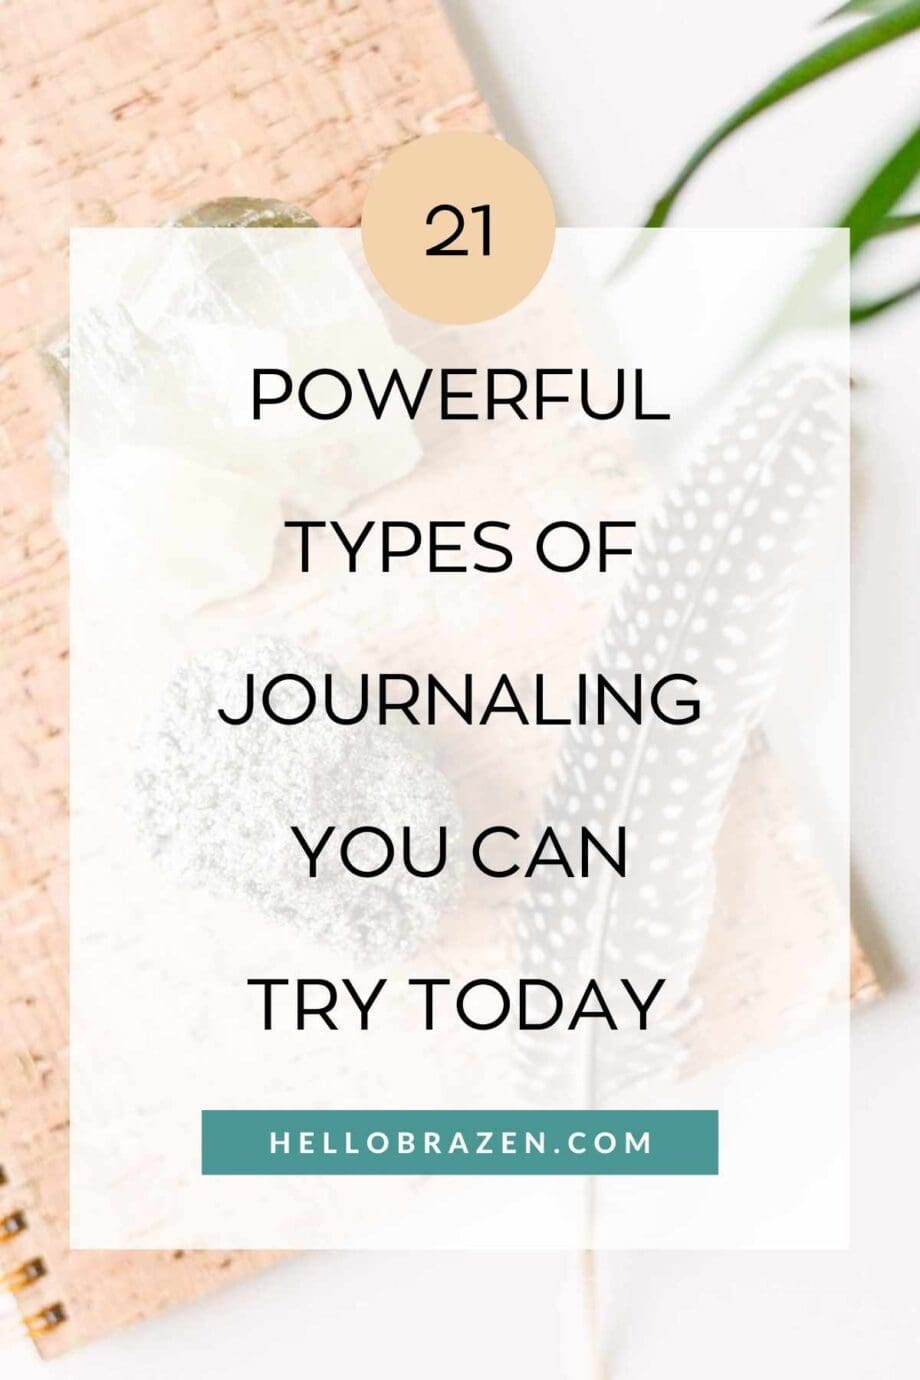 Journaling is a form of self-care that can be hugely beneficial for your mental health. There are many ways to express yourself through journaling. Here are 21 powerful types of journaling you can try today.